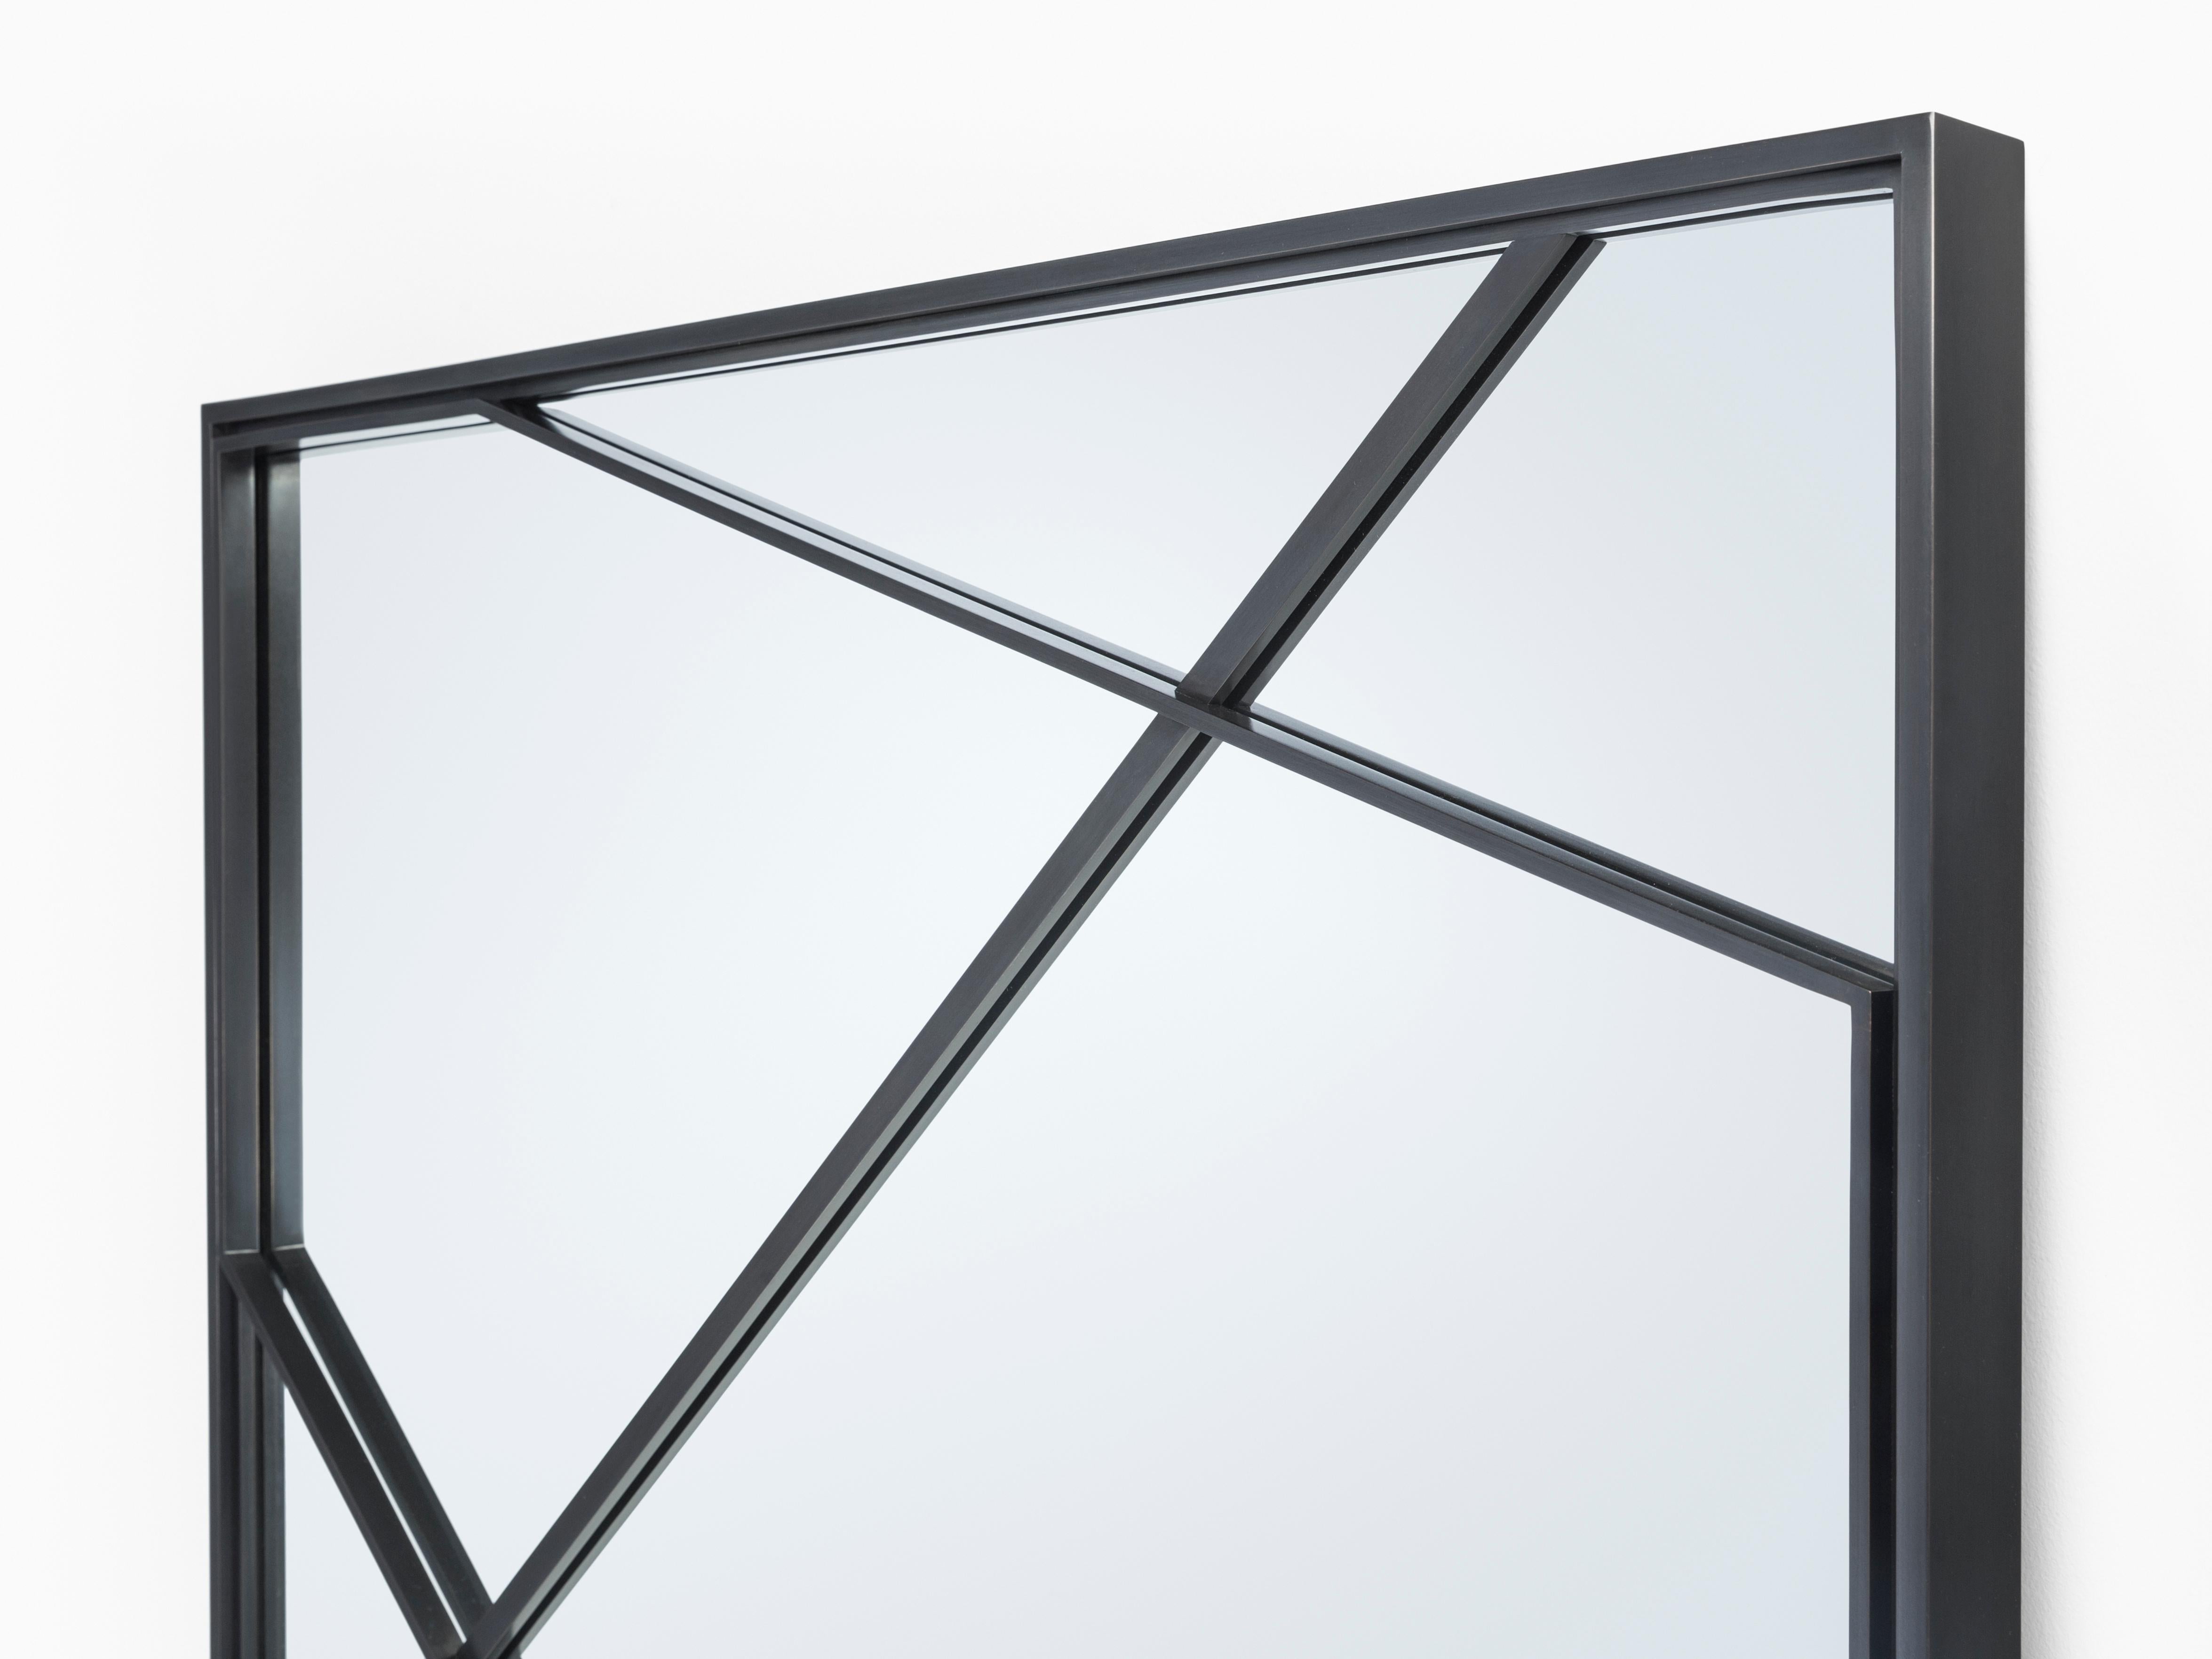 Displaying exquisite metalwork, this perspective-shifting design brings gridded three-dimensionality to a mirror. An integration of mirror and frame, this HOLLY HUNT original is anything but expected.

Additional Information:
Material: Metal
Finish: